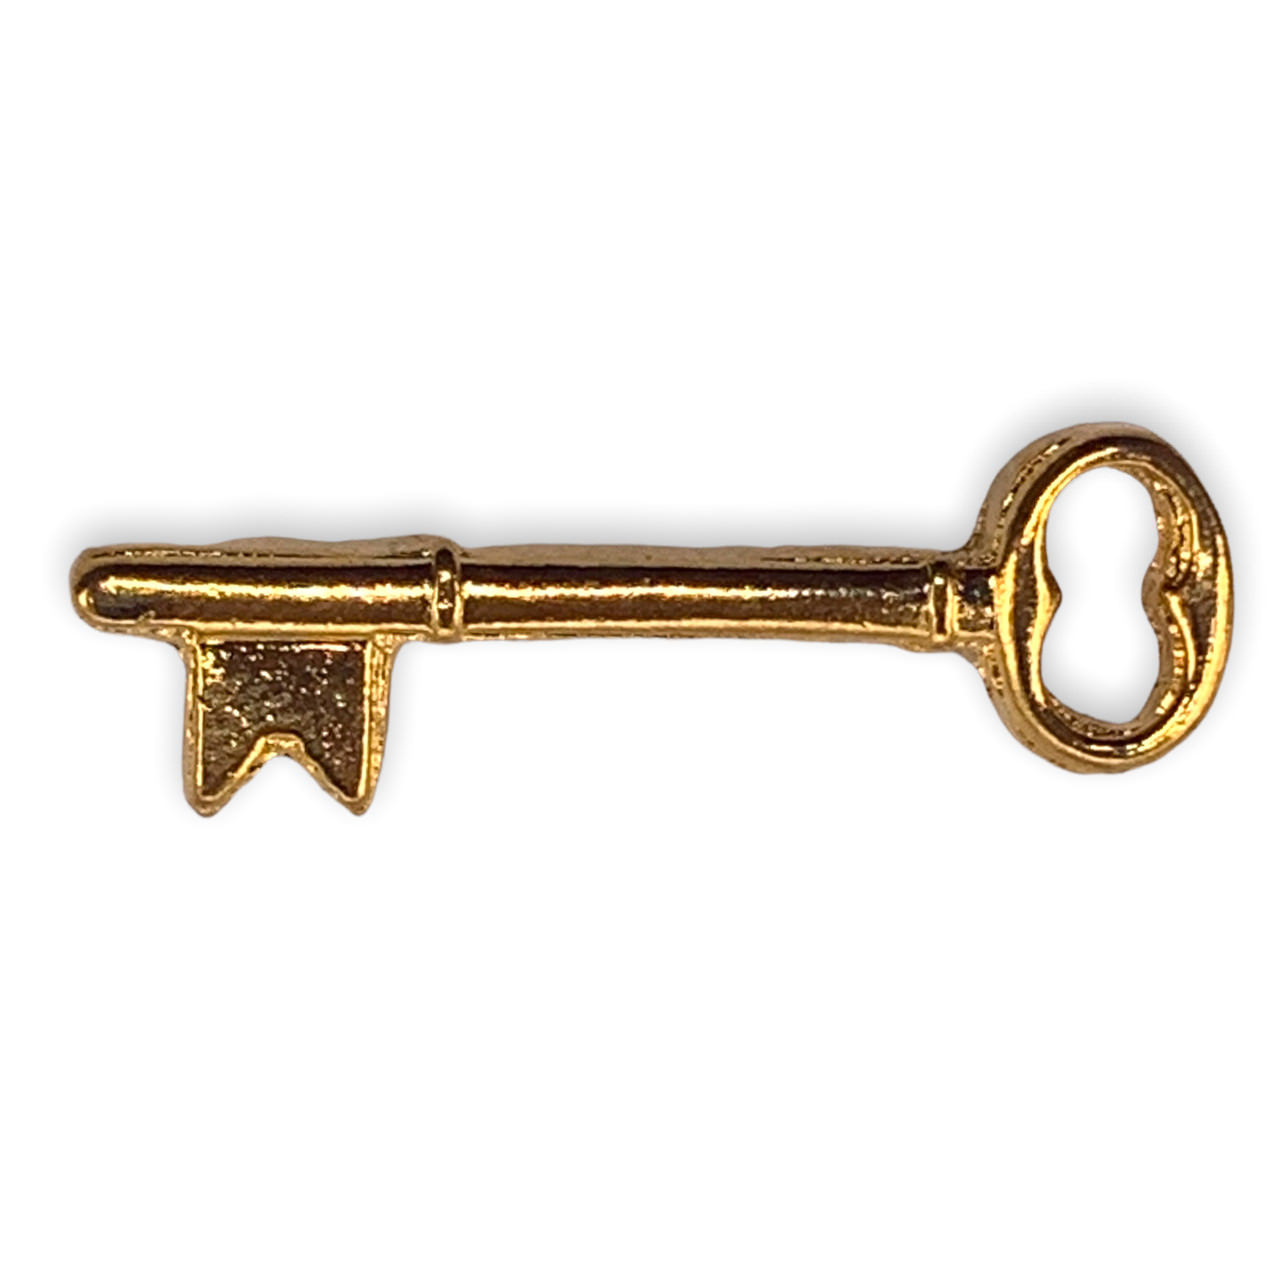 https://www.ceremonialsupplies.com/images/thumbs/0002178_ceremonial-key-to-the-city-lapel-pin.jpeg